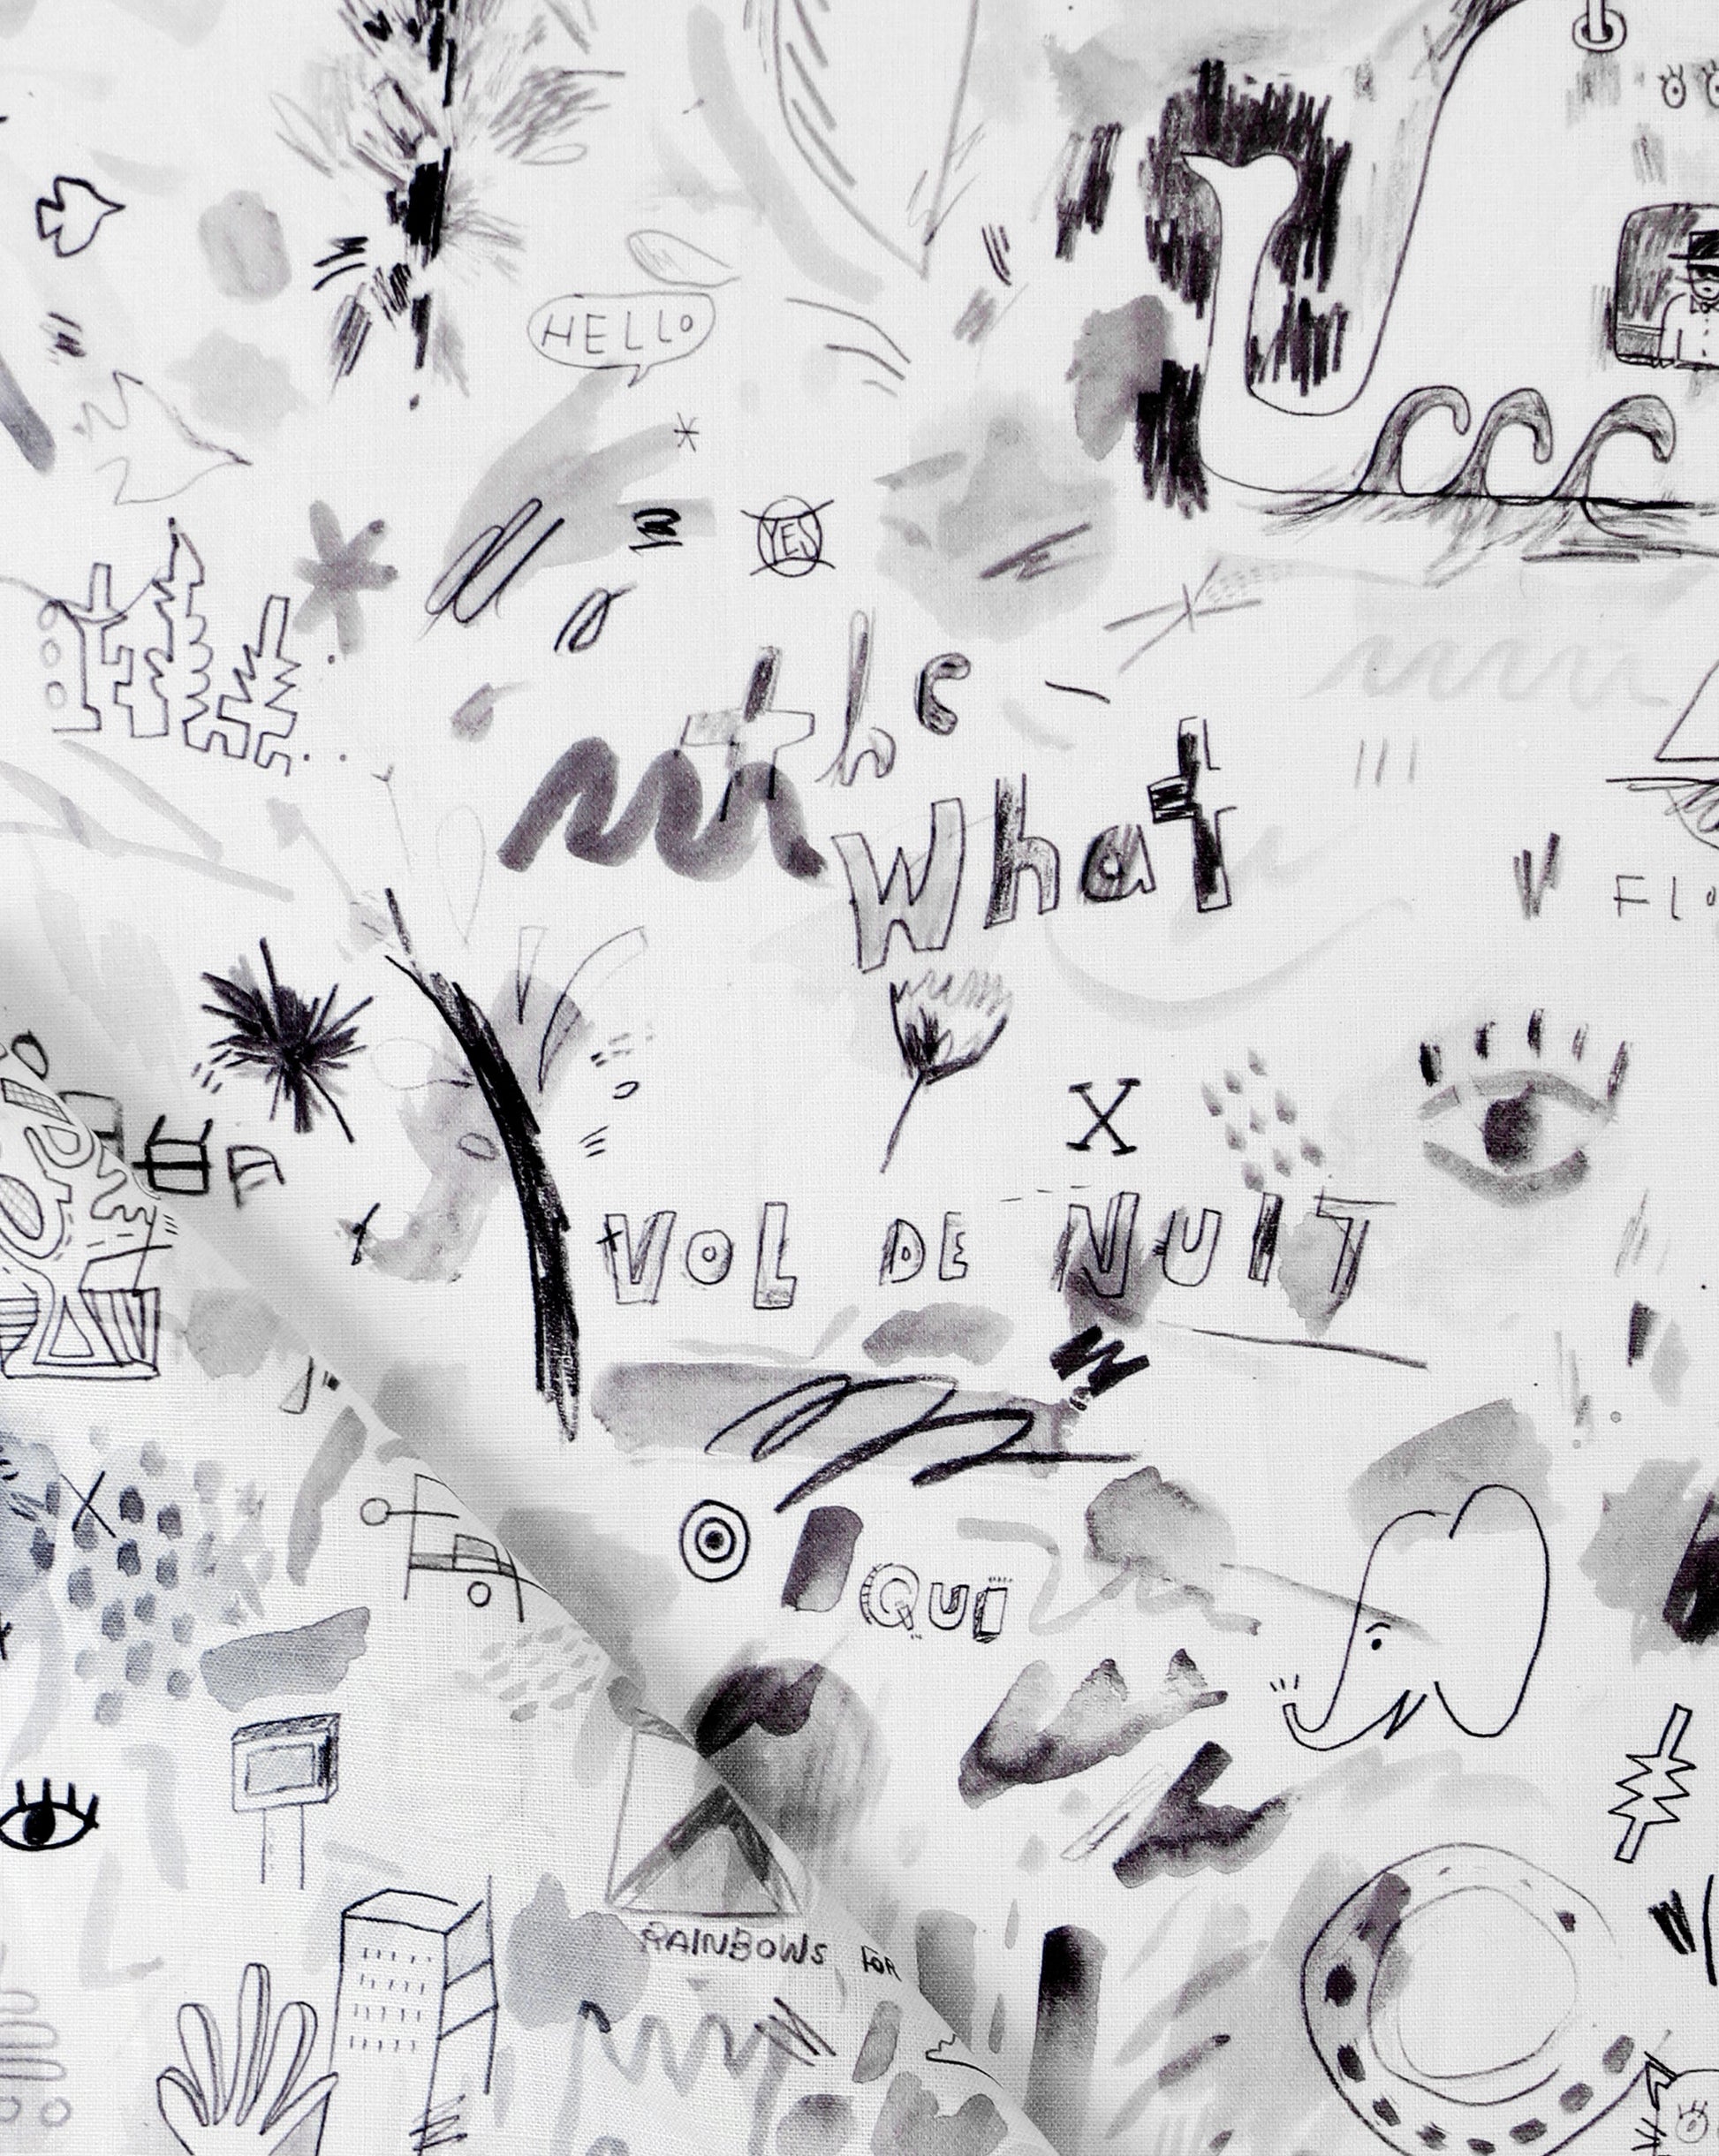 A black and white luxury Vol de Nuit Fabric Noire with a lot of writing on it, such as Eskayel and Vol de Nuit designs